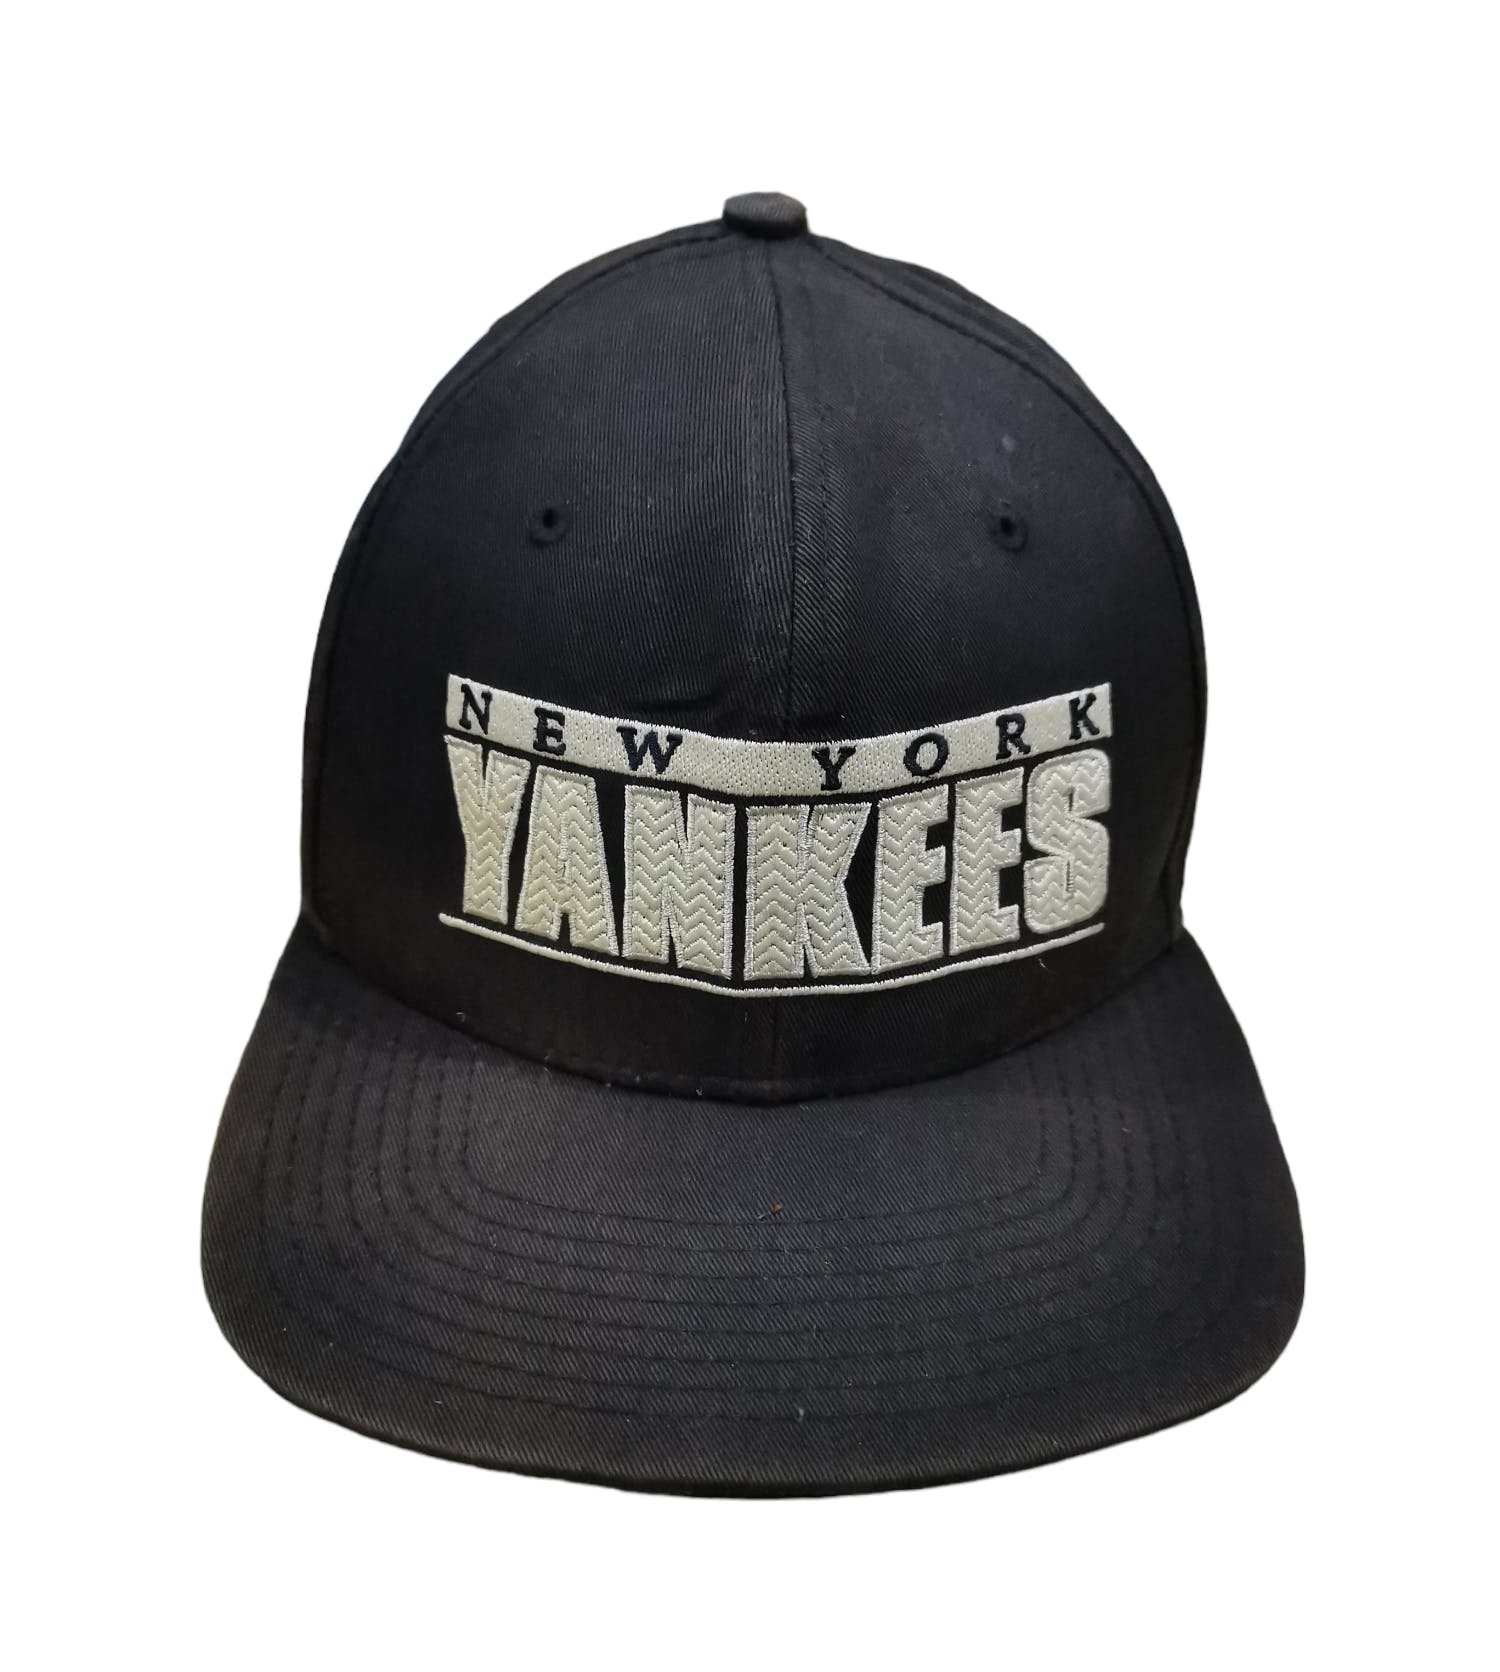 Vintage New York Yankees Hat x Team Nike Sports Embroidery - 1